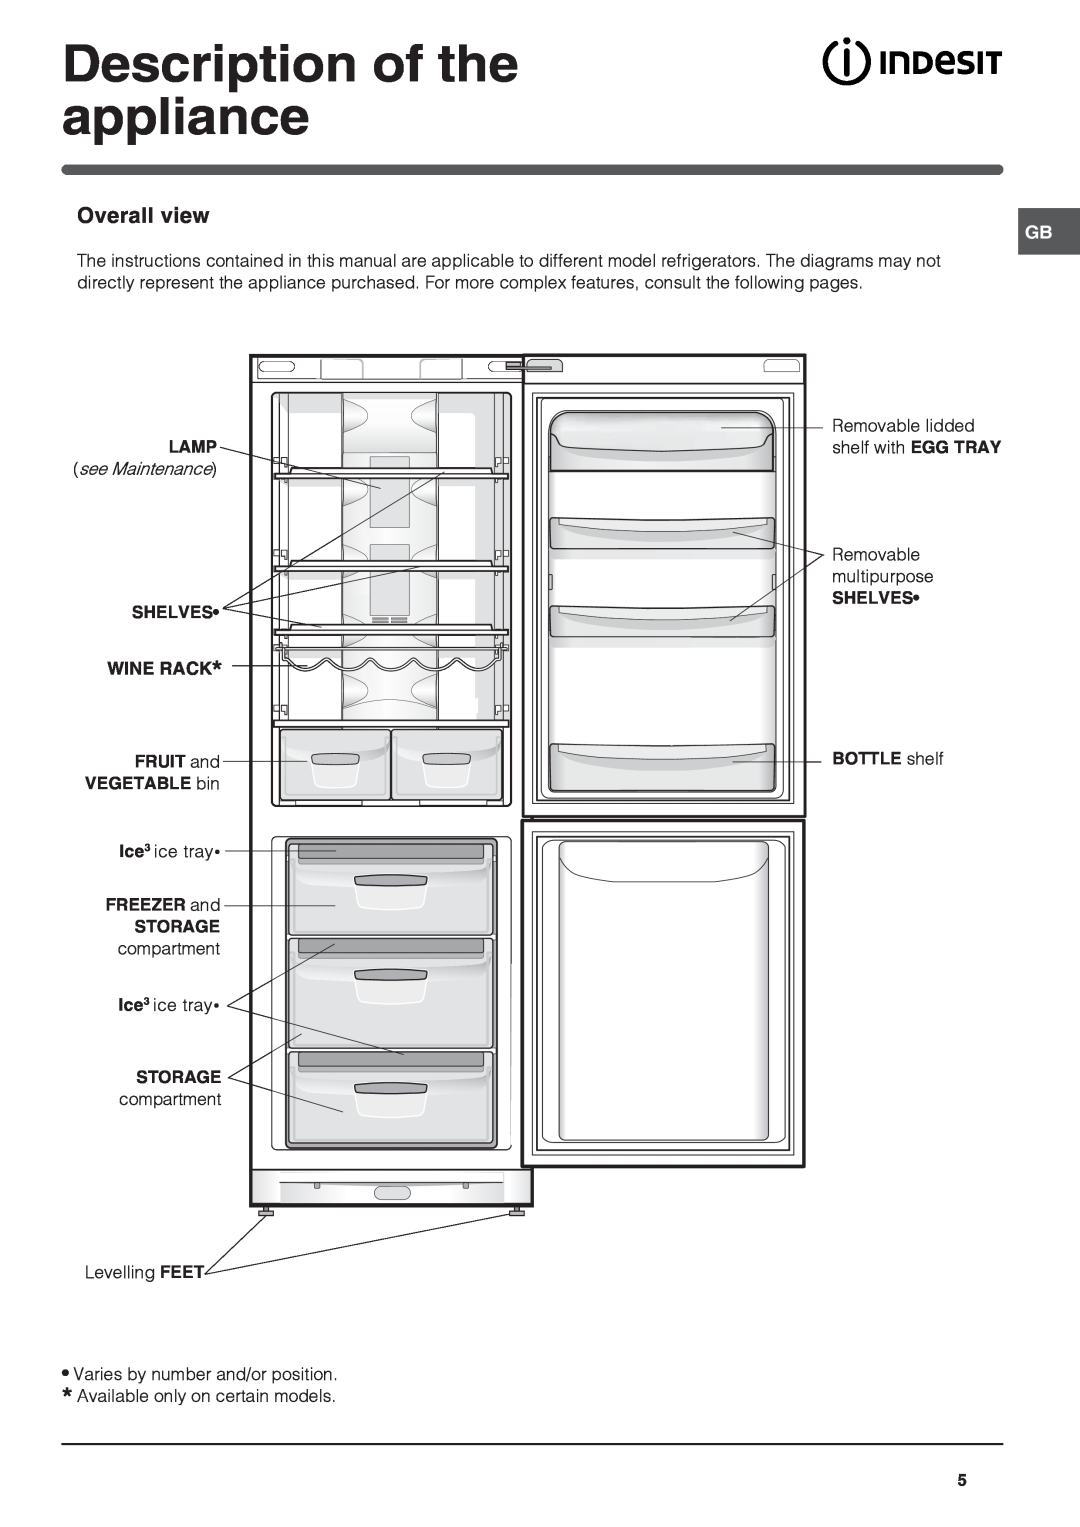 Indesit Refrigerator manual Overall view, Description of the appliance, Lamp, Shelves Wine Rack, FRUIT and VEGETABLE bin 